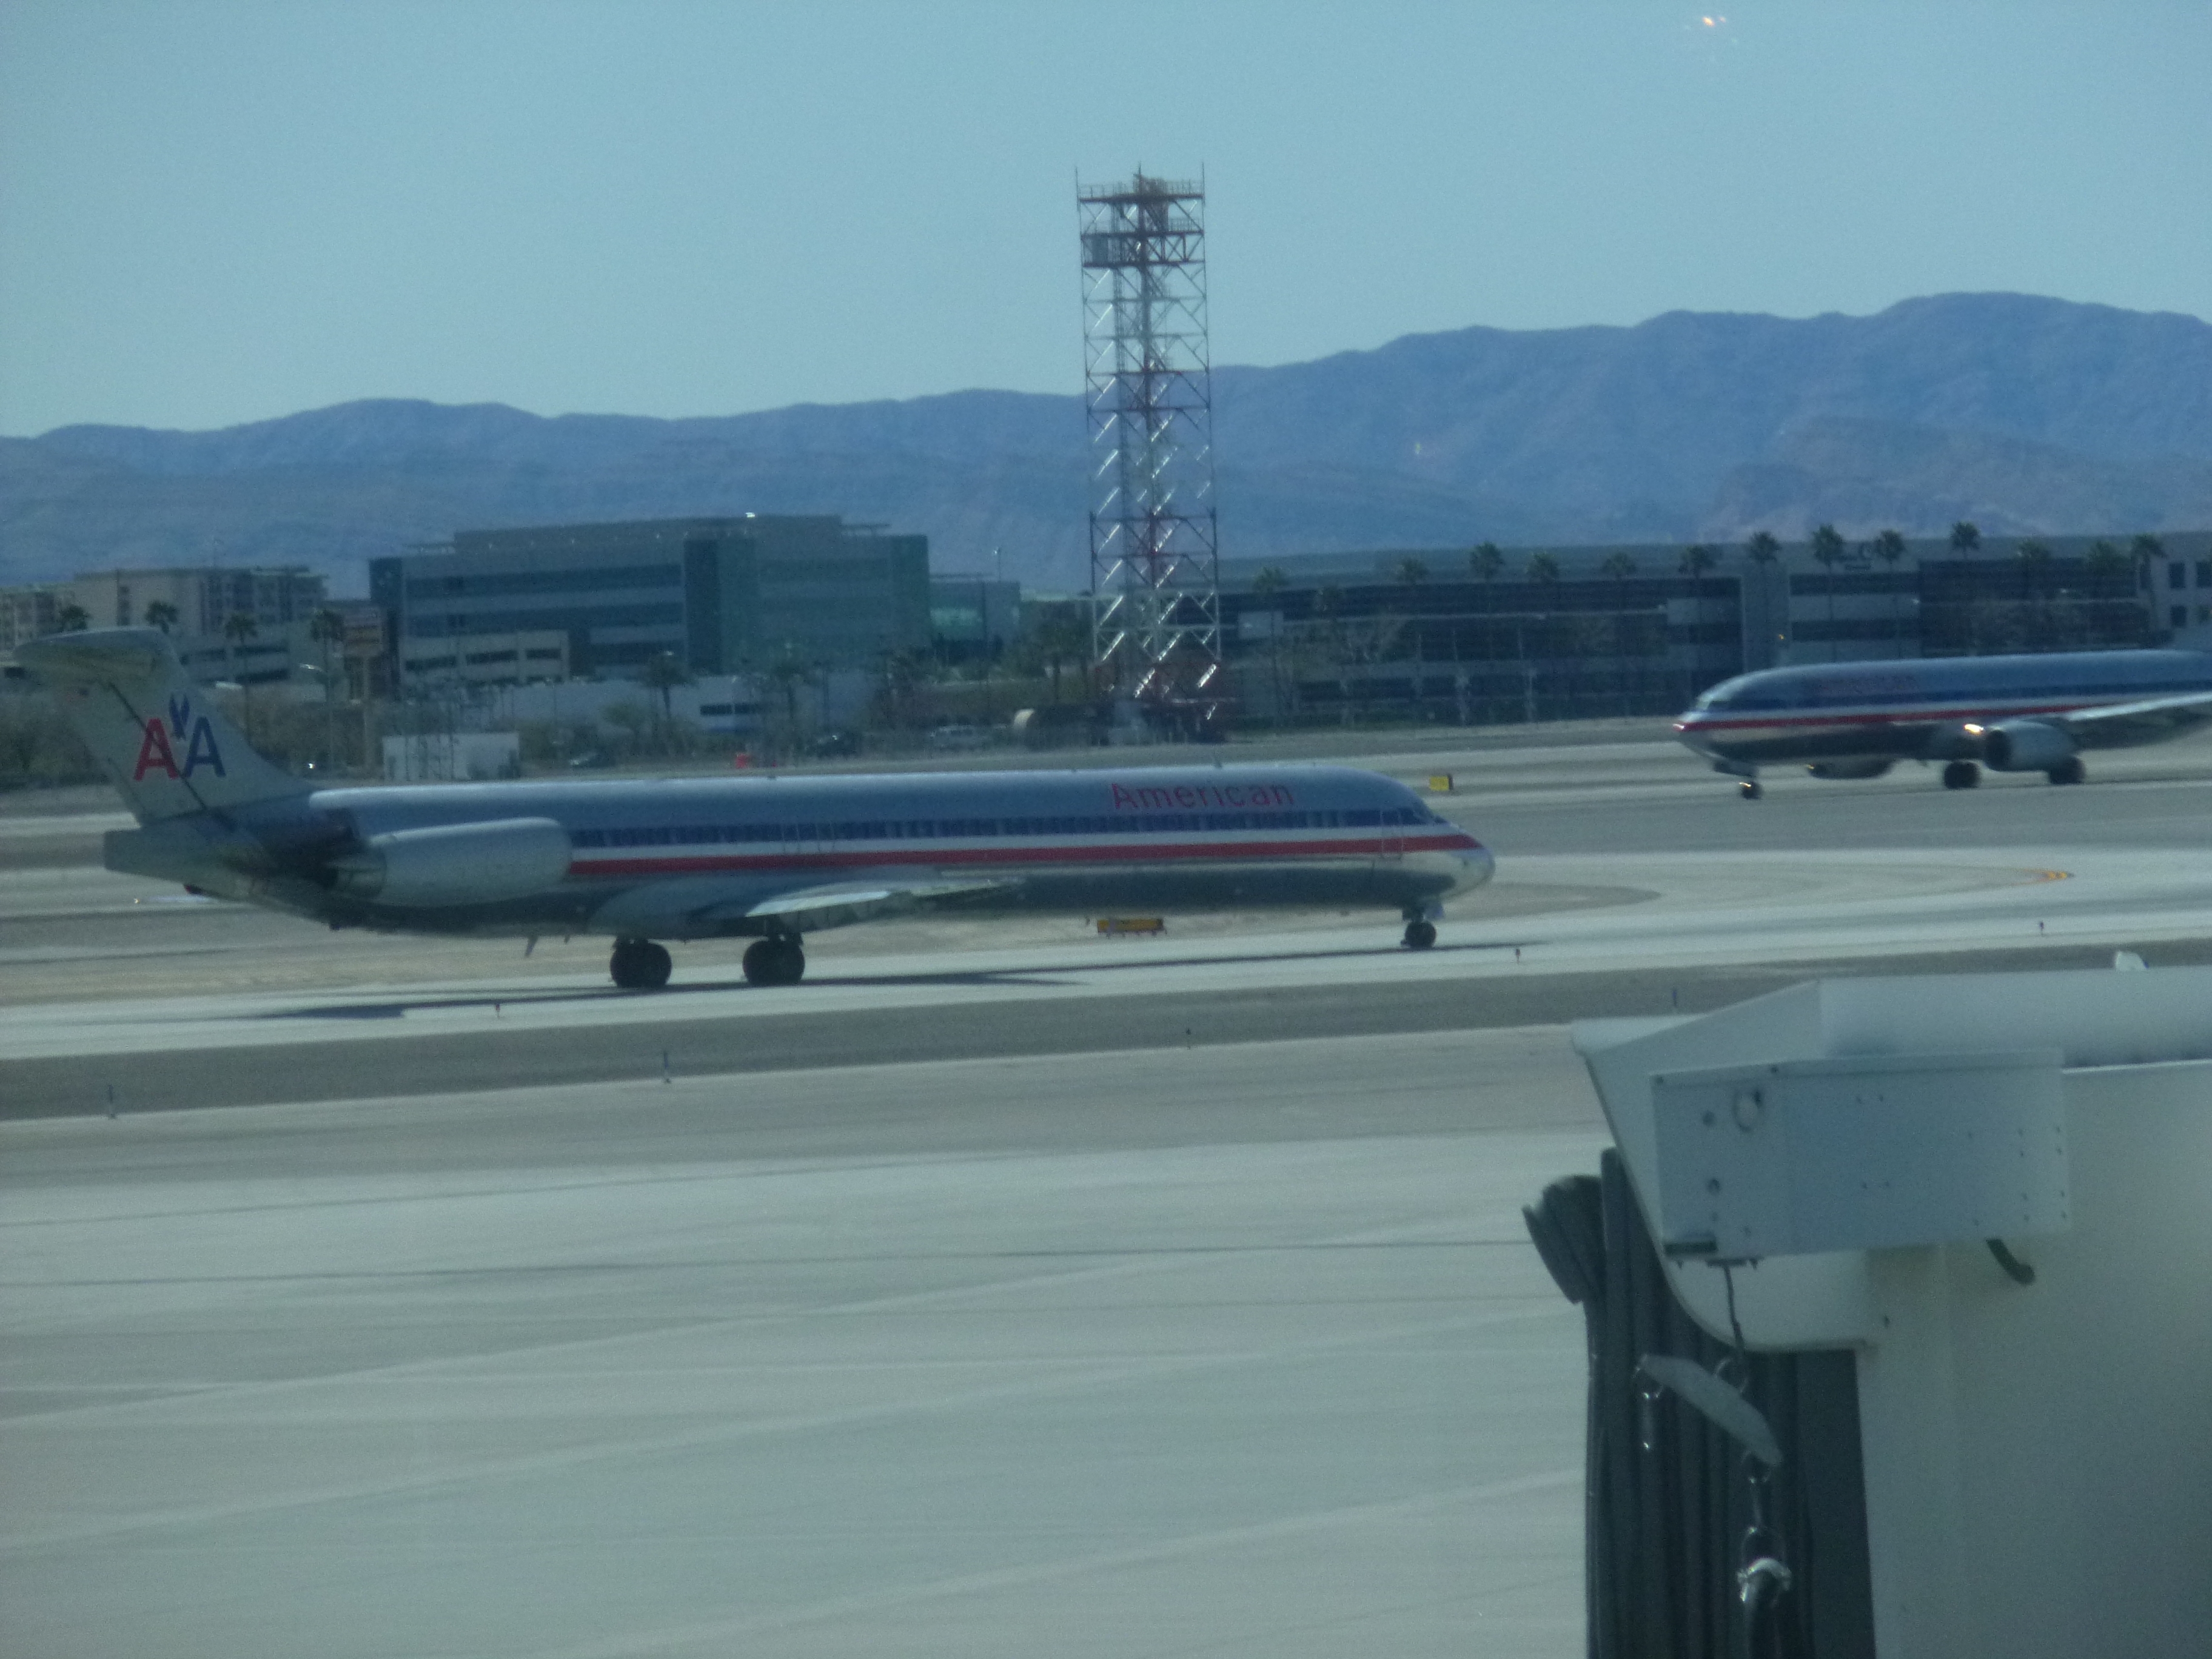 MD-80 taxing 737 800 take off